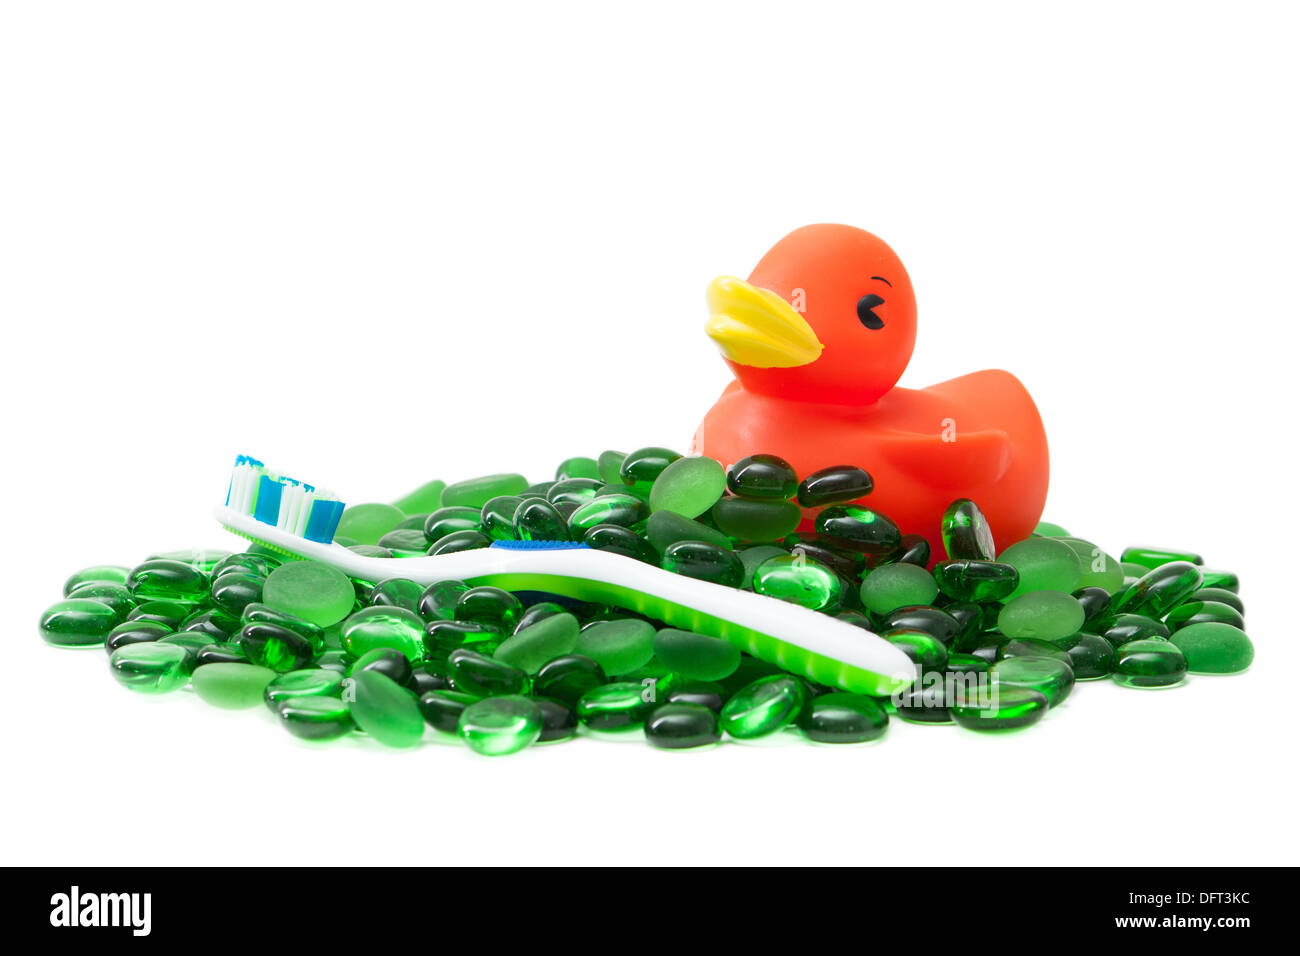 A rubber duckie and toothbrush on a sea of green glass beads isolated on white creates a clean image that says kids bathroom. Stock Photo